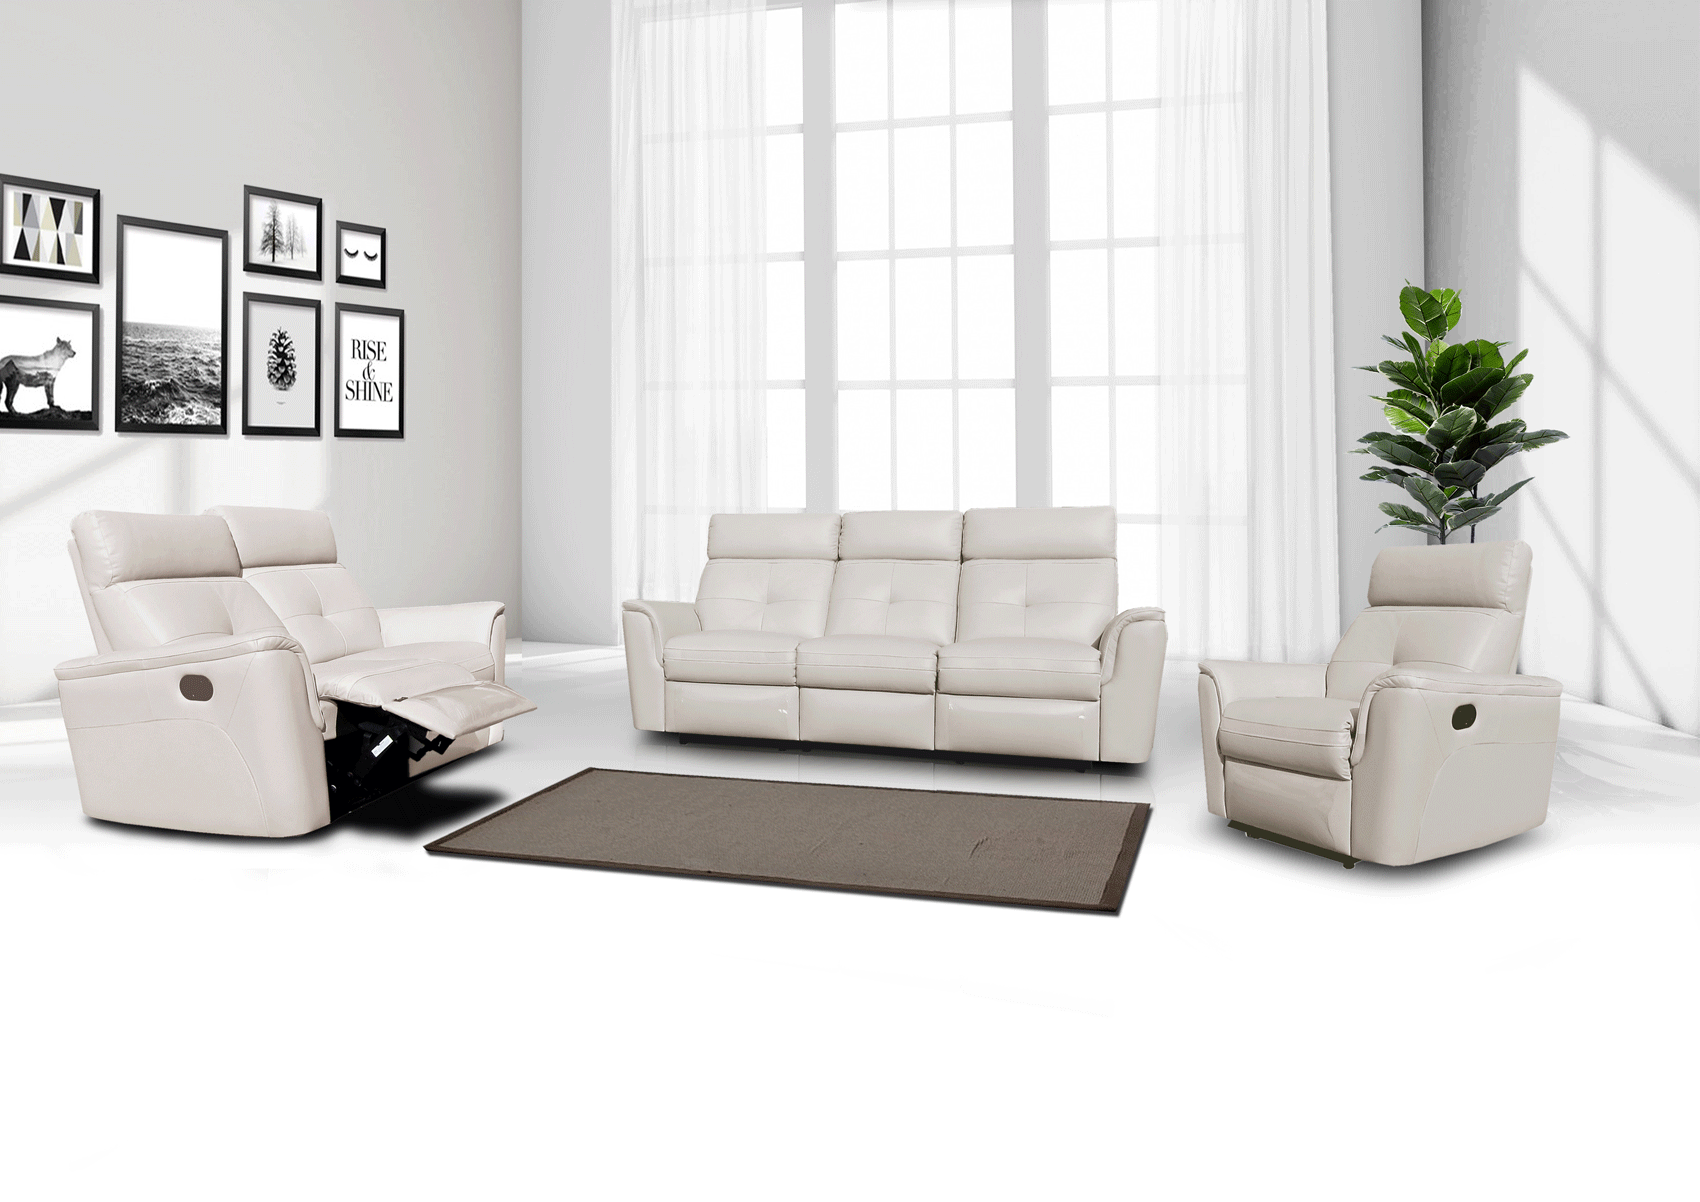 Living Room Furniture Sleepers Sofas Loveseats and Chairs 8501 White w/Manual Recliners